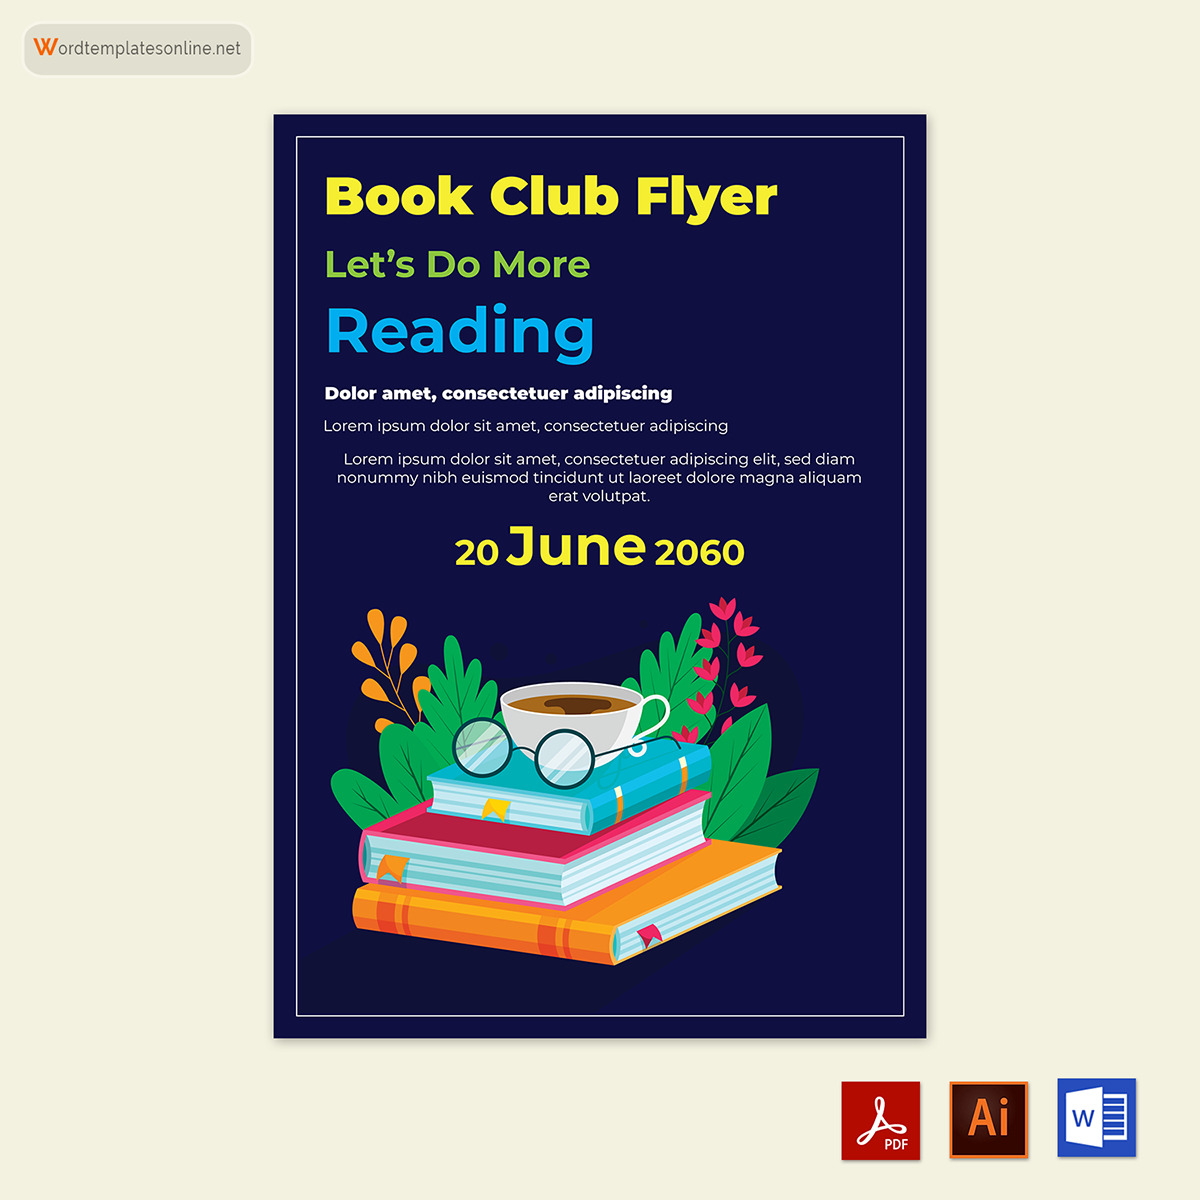 Professional Book Club Flyer Templates - Free Word, PSD, AI Sample